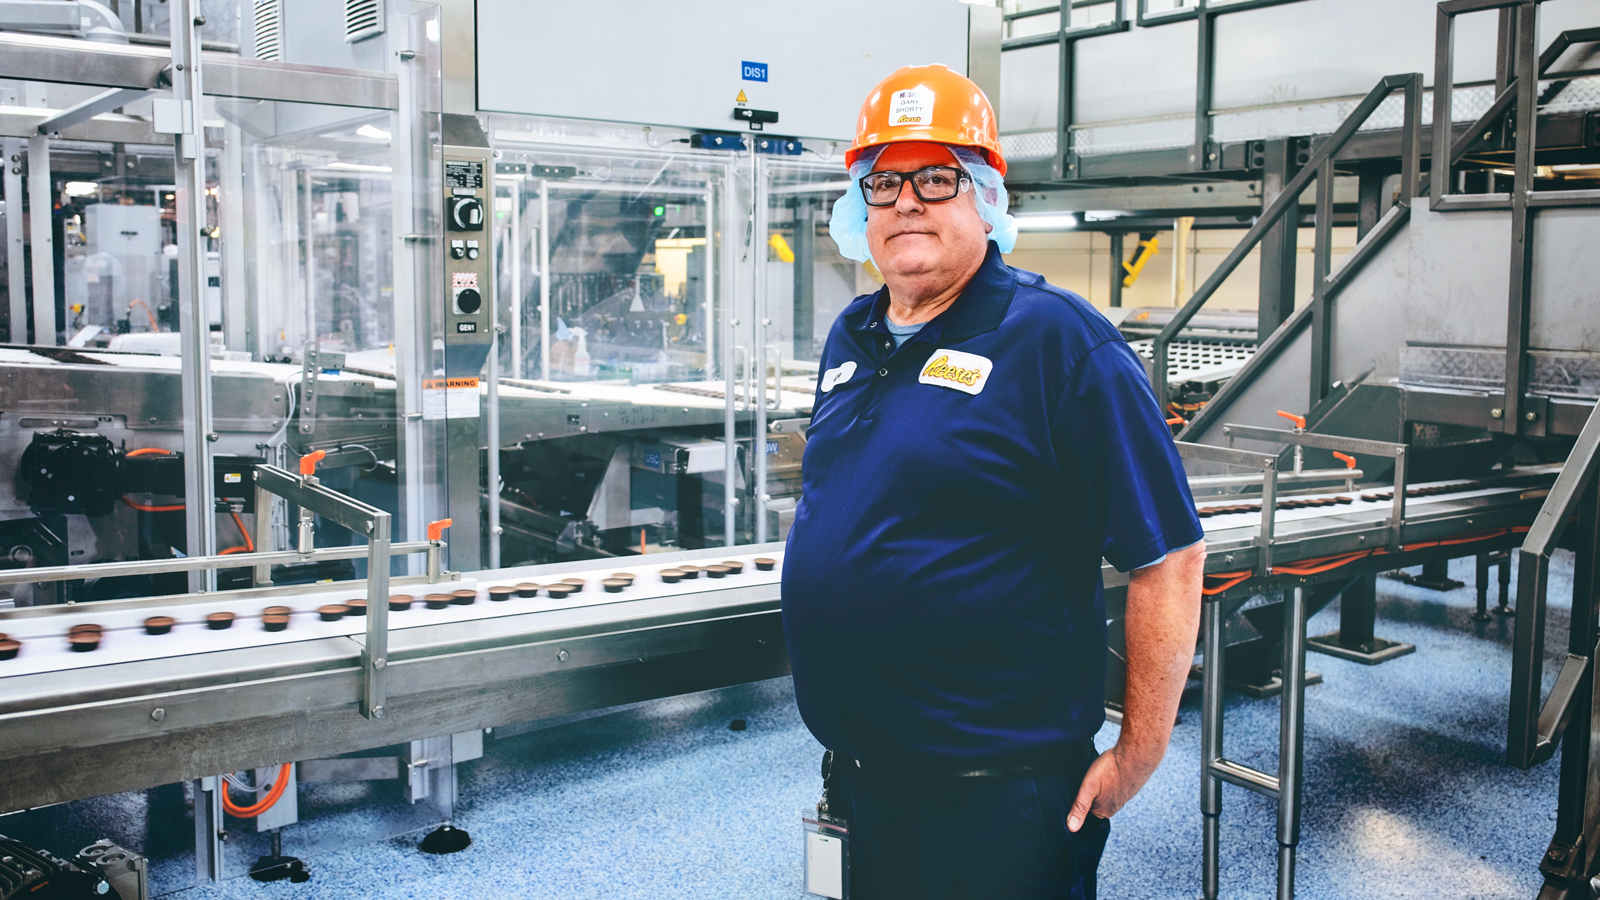 Gary Shortt ’86, plant manager for the Reese’s factory in Hershey, PA